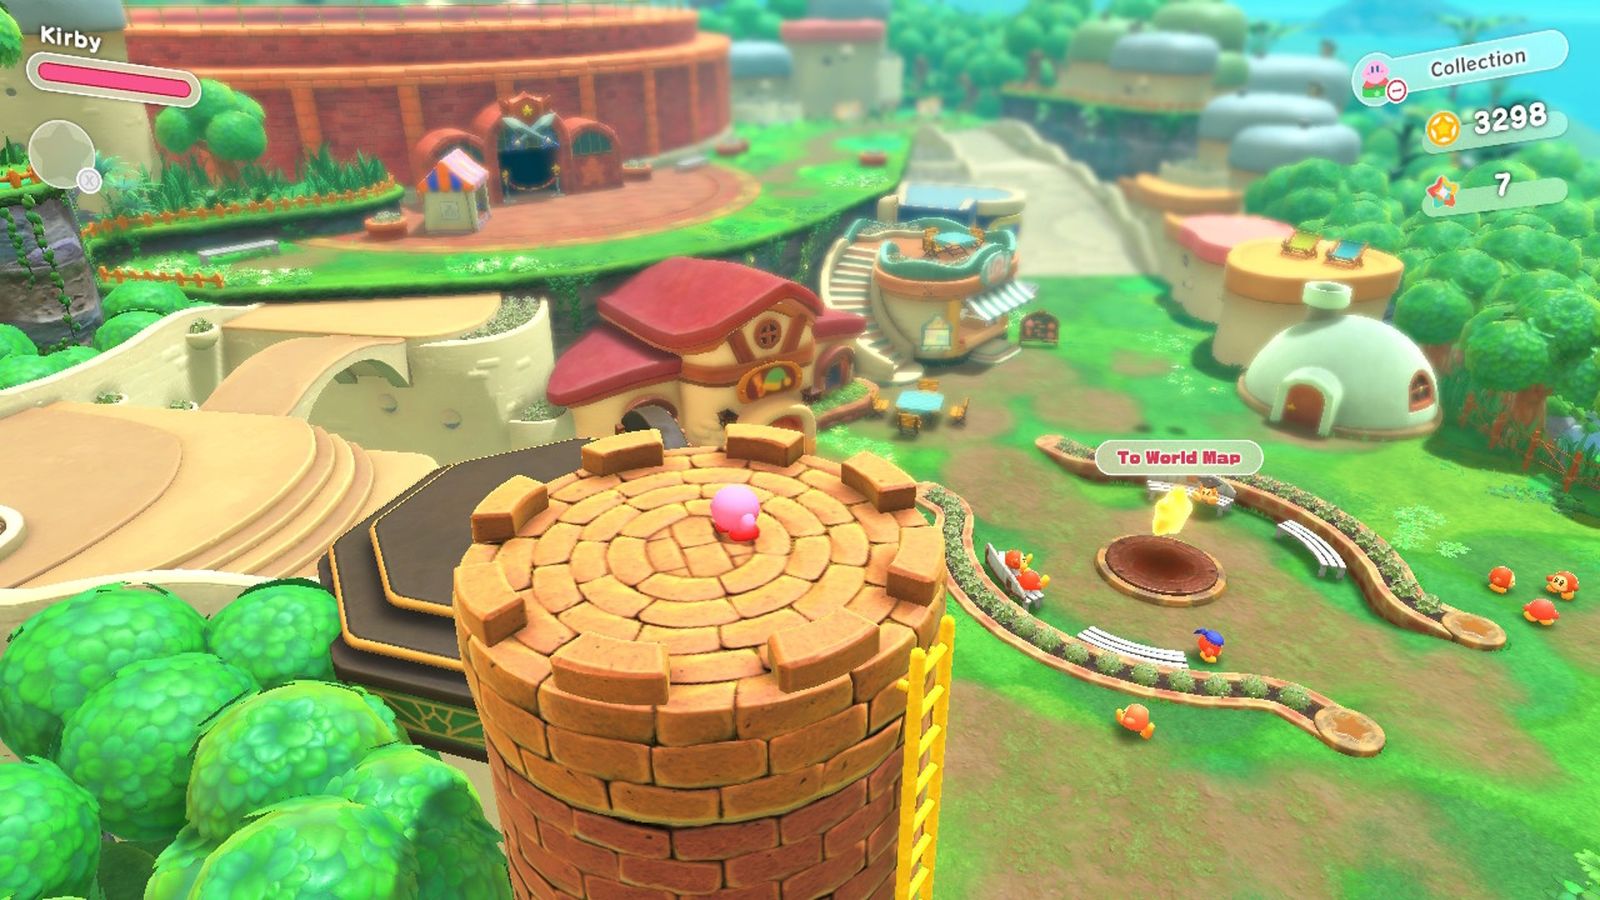 Image of Kirby looking at Waddle Dee Town in Kirby and the Forgotten Land.